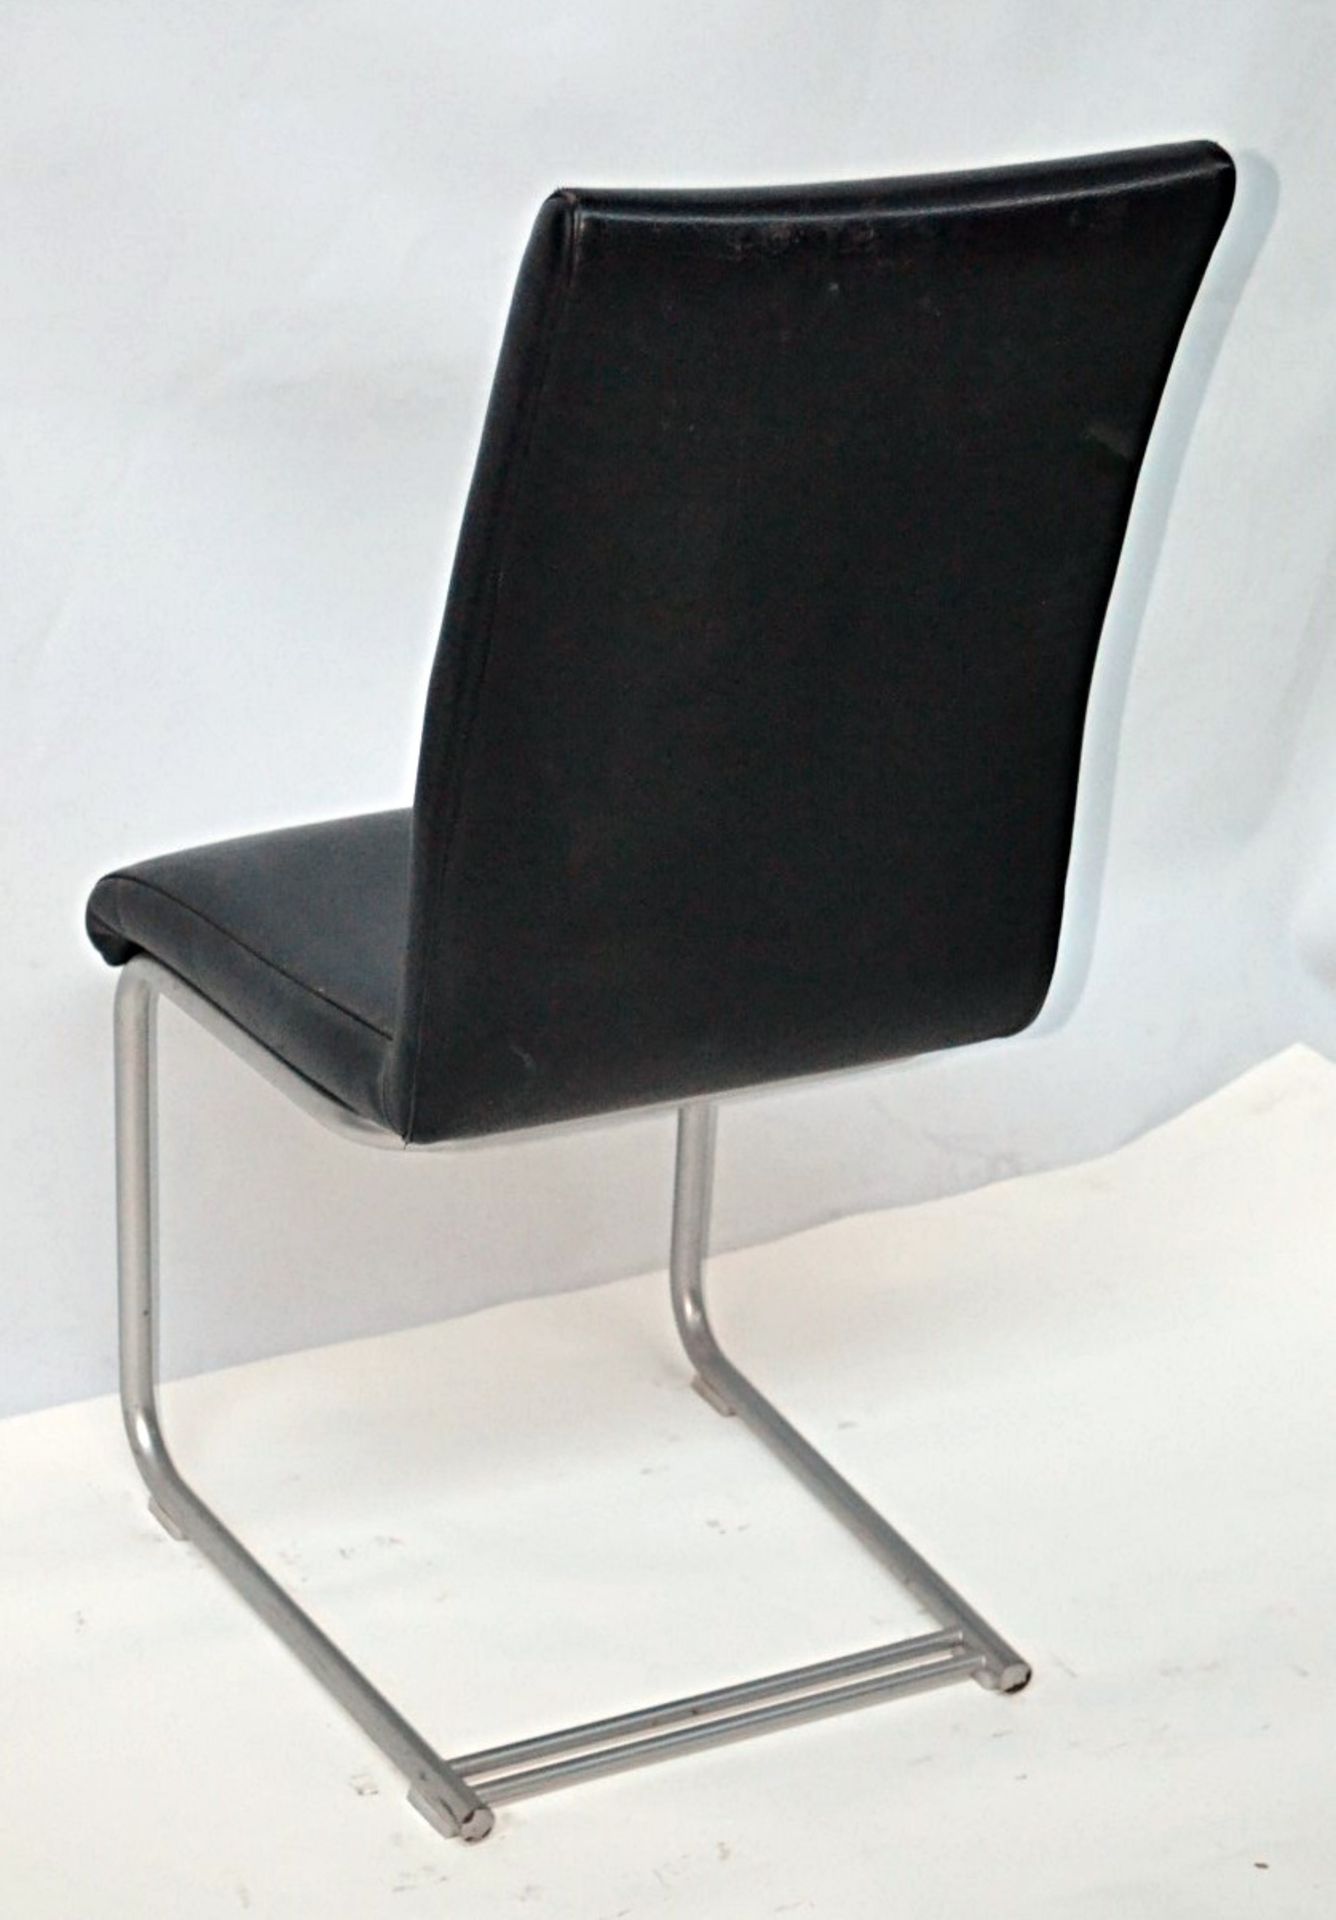 6 x Matching VENJAKOB "Let's Go" Dining Chairs - Expertly Upholstered In Black Leather With Metal Ca - Image 4 of 9